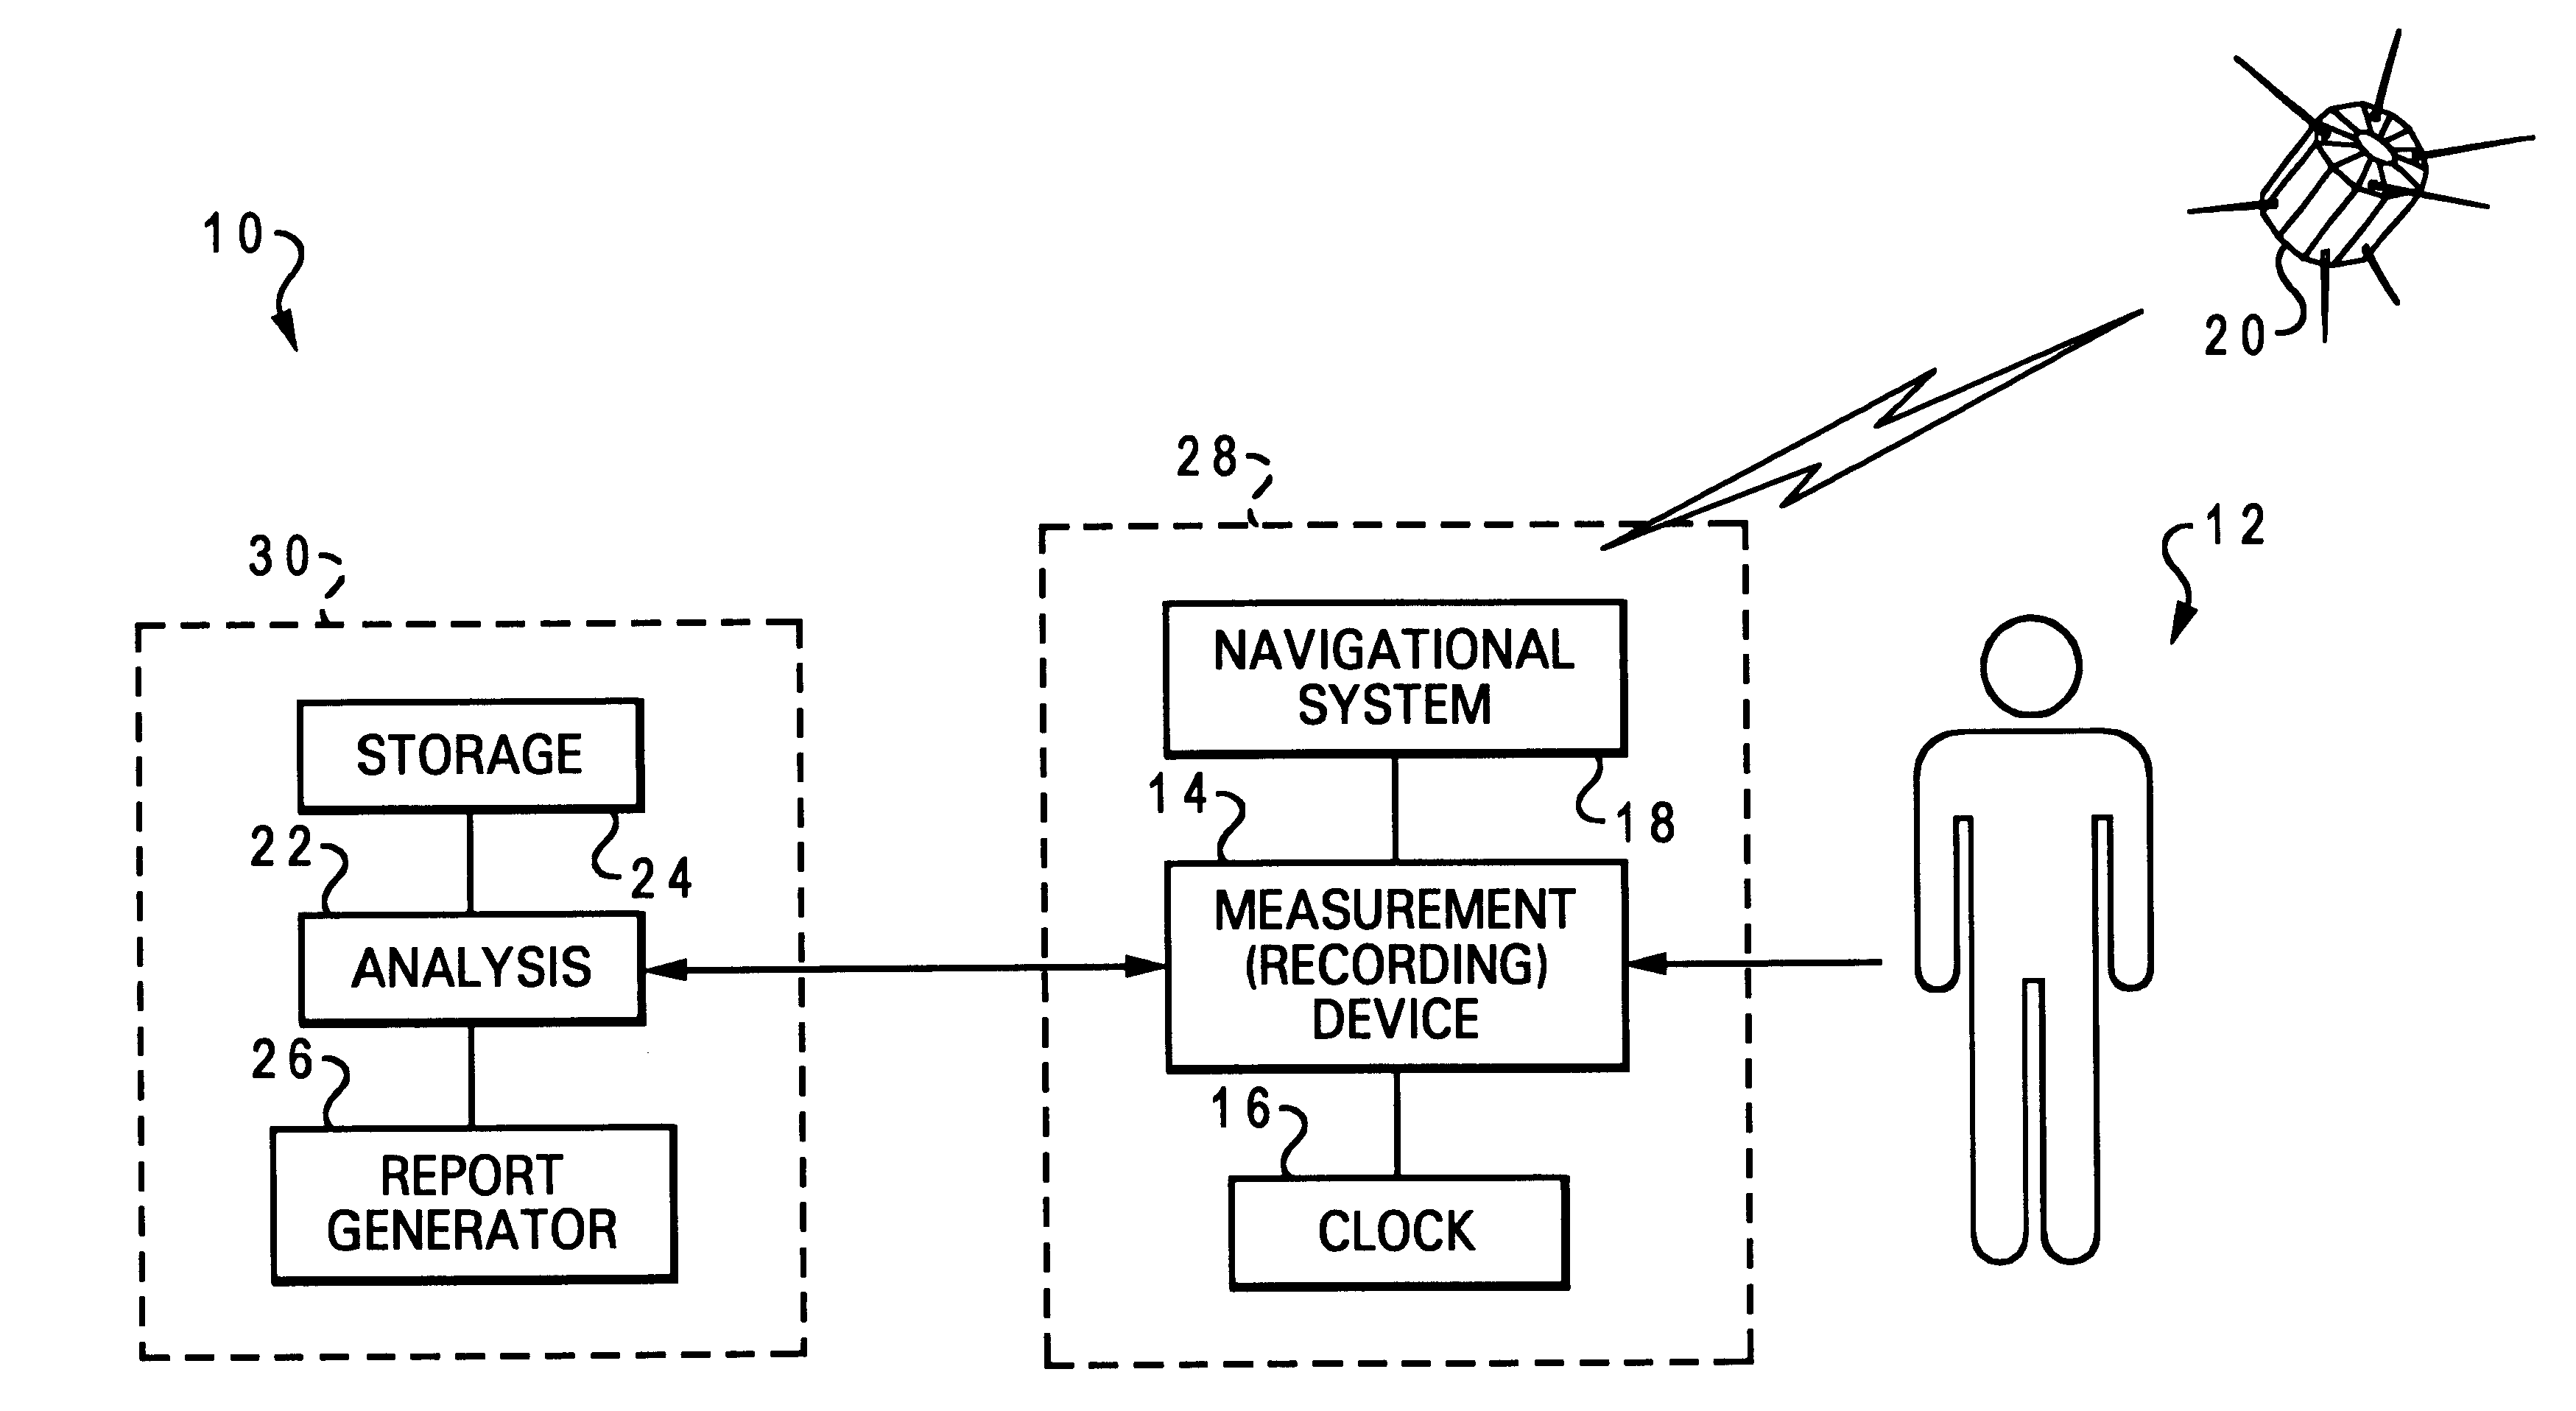 Measurement and validation of interaction and communication